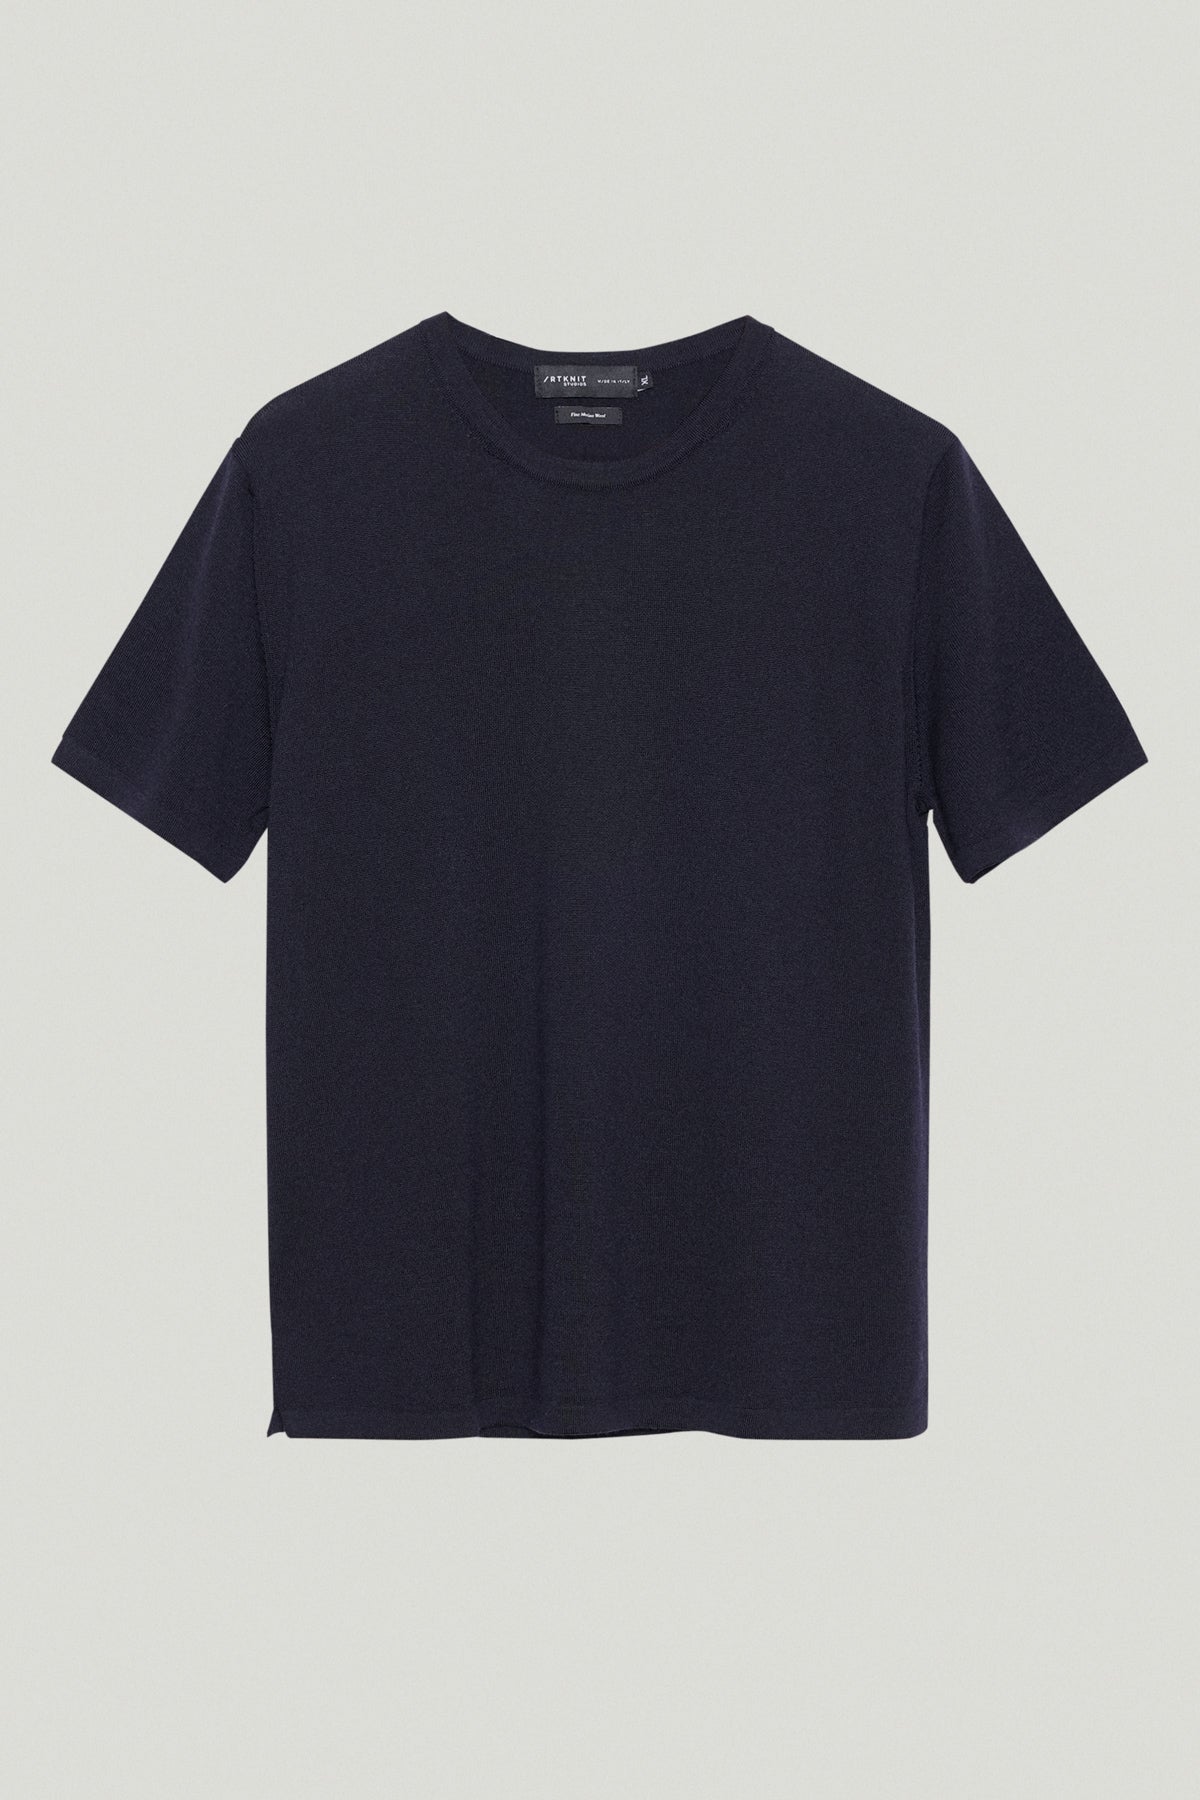 Blue Navy | The Merino Wool Knit T-shirt – Imperfect Version